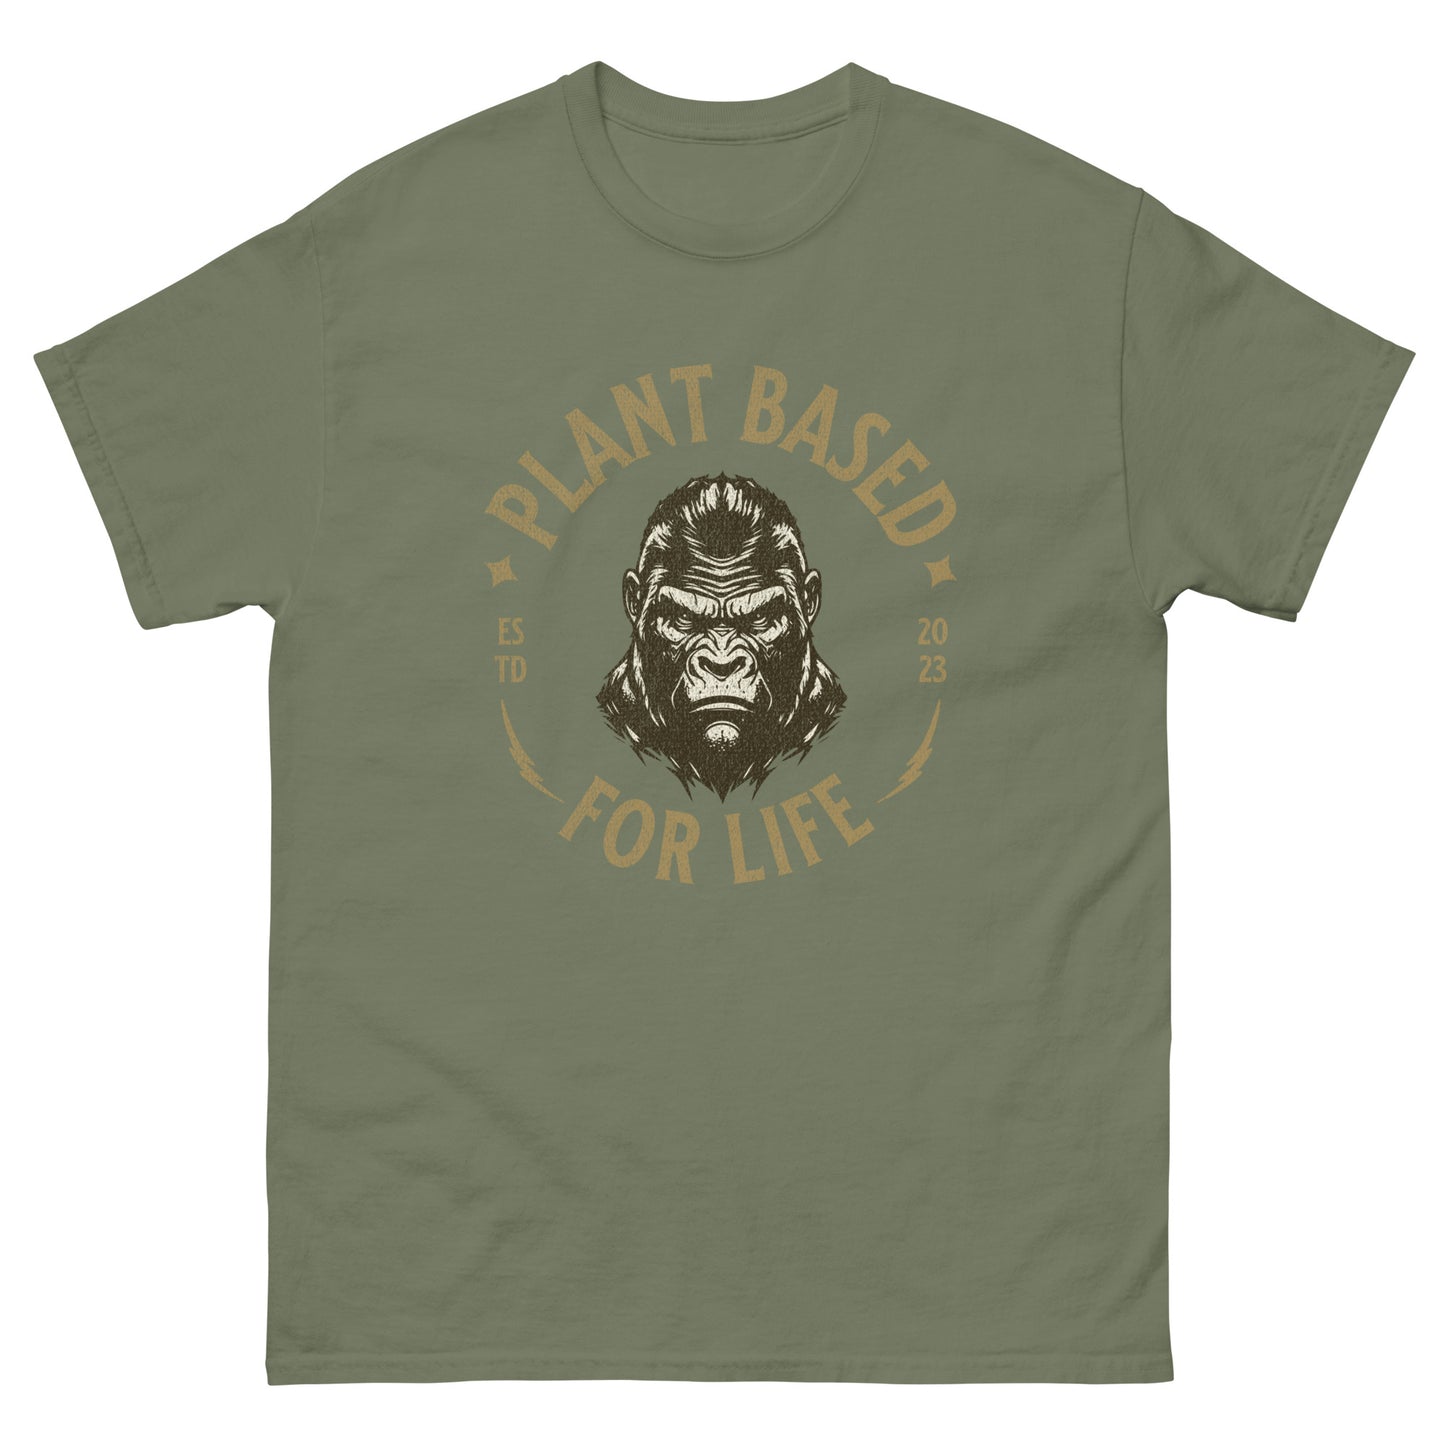 Plant Based For Life New Colors